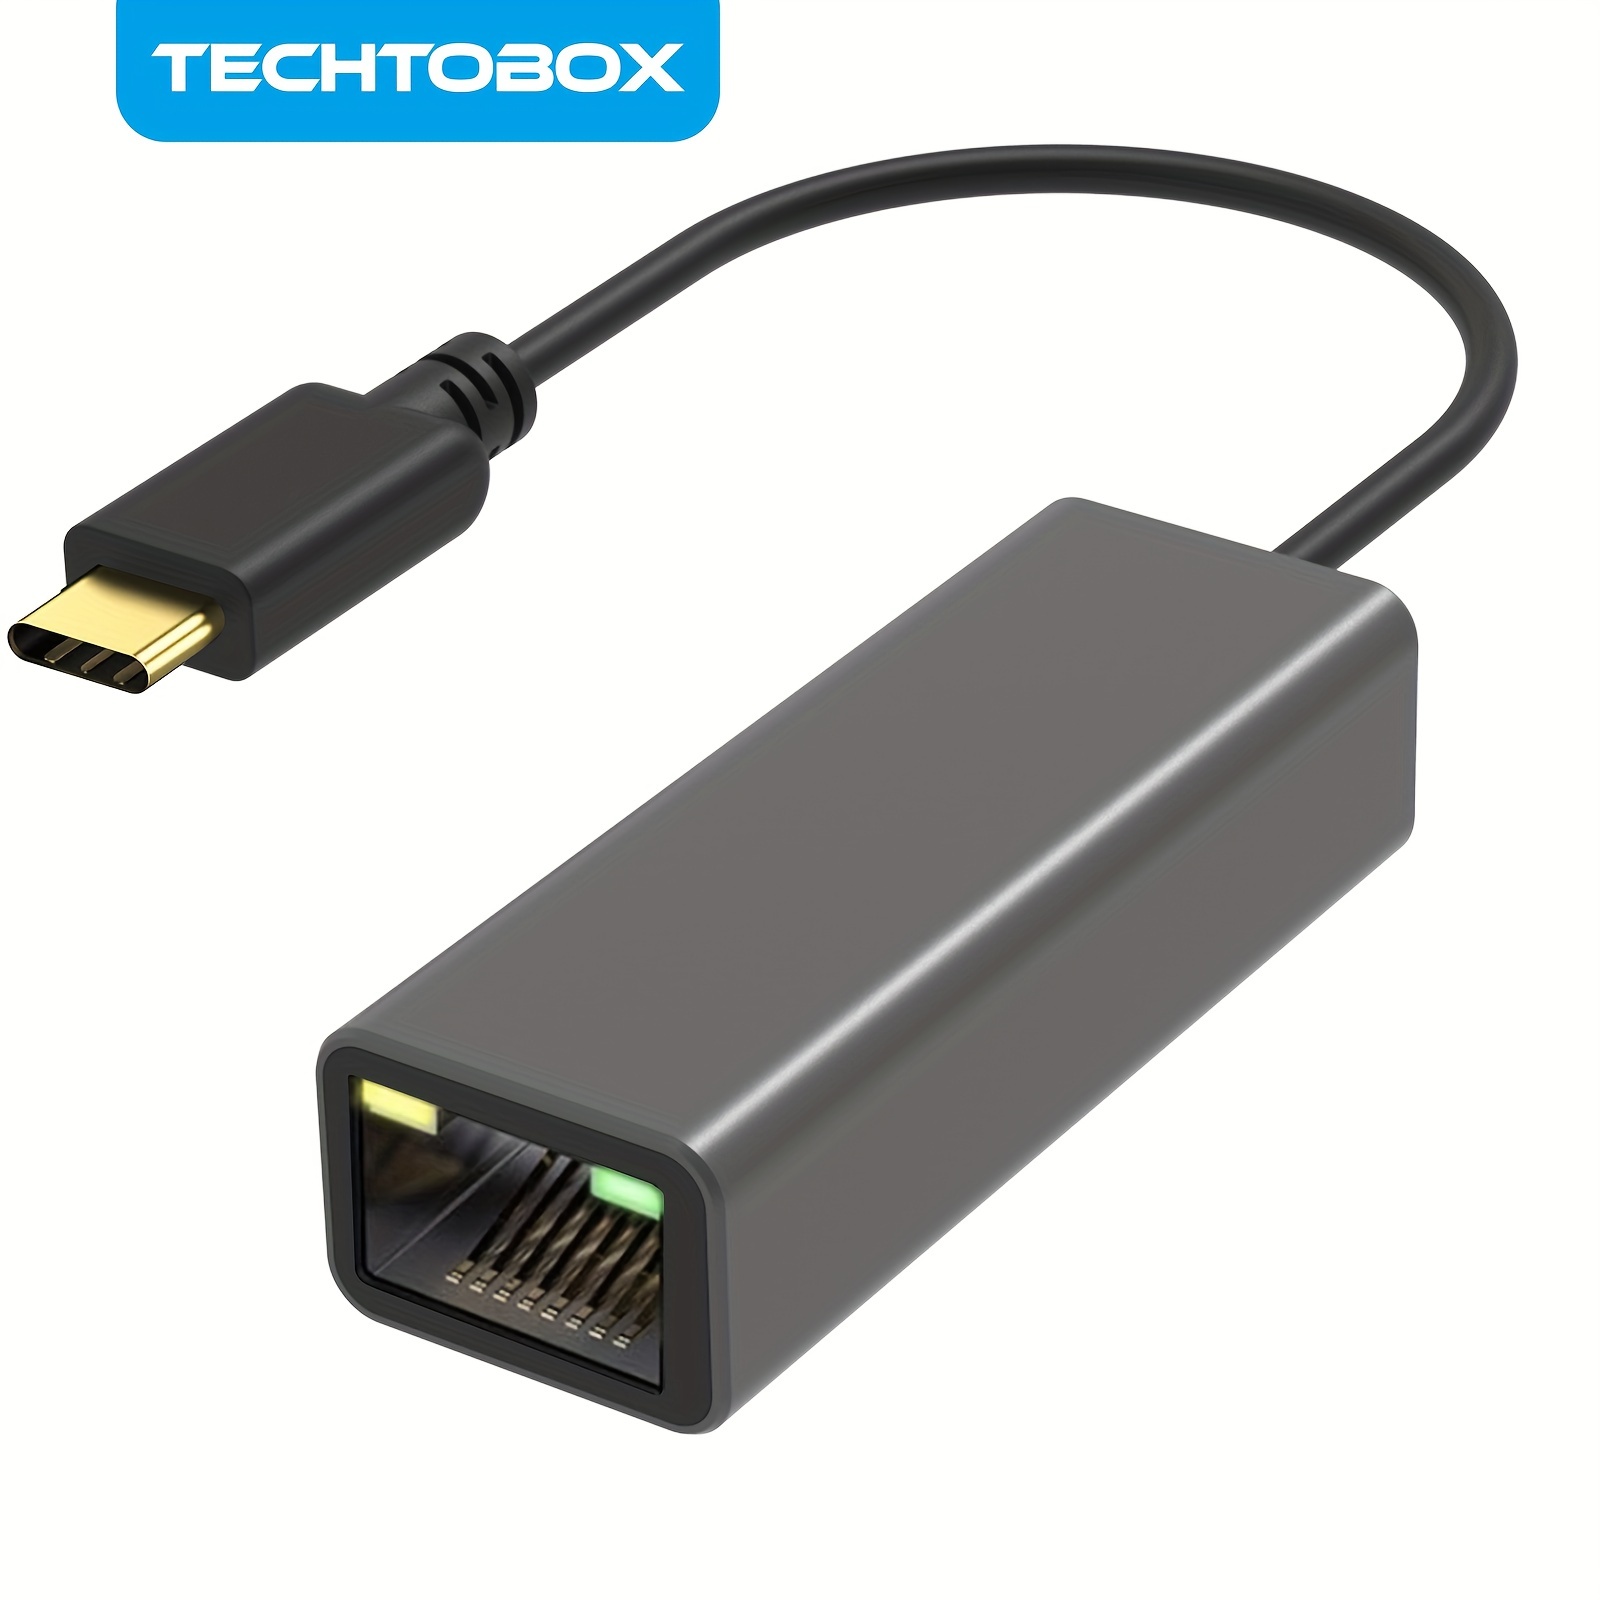 USB 3 to Gigabit Network Adapter -Silver - USB and Thunderbolt